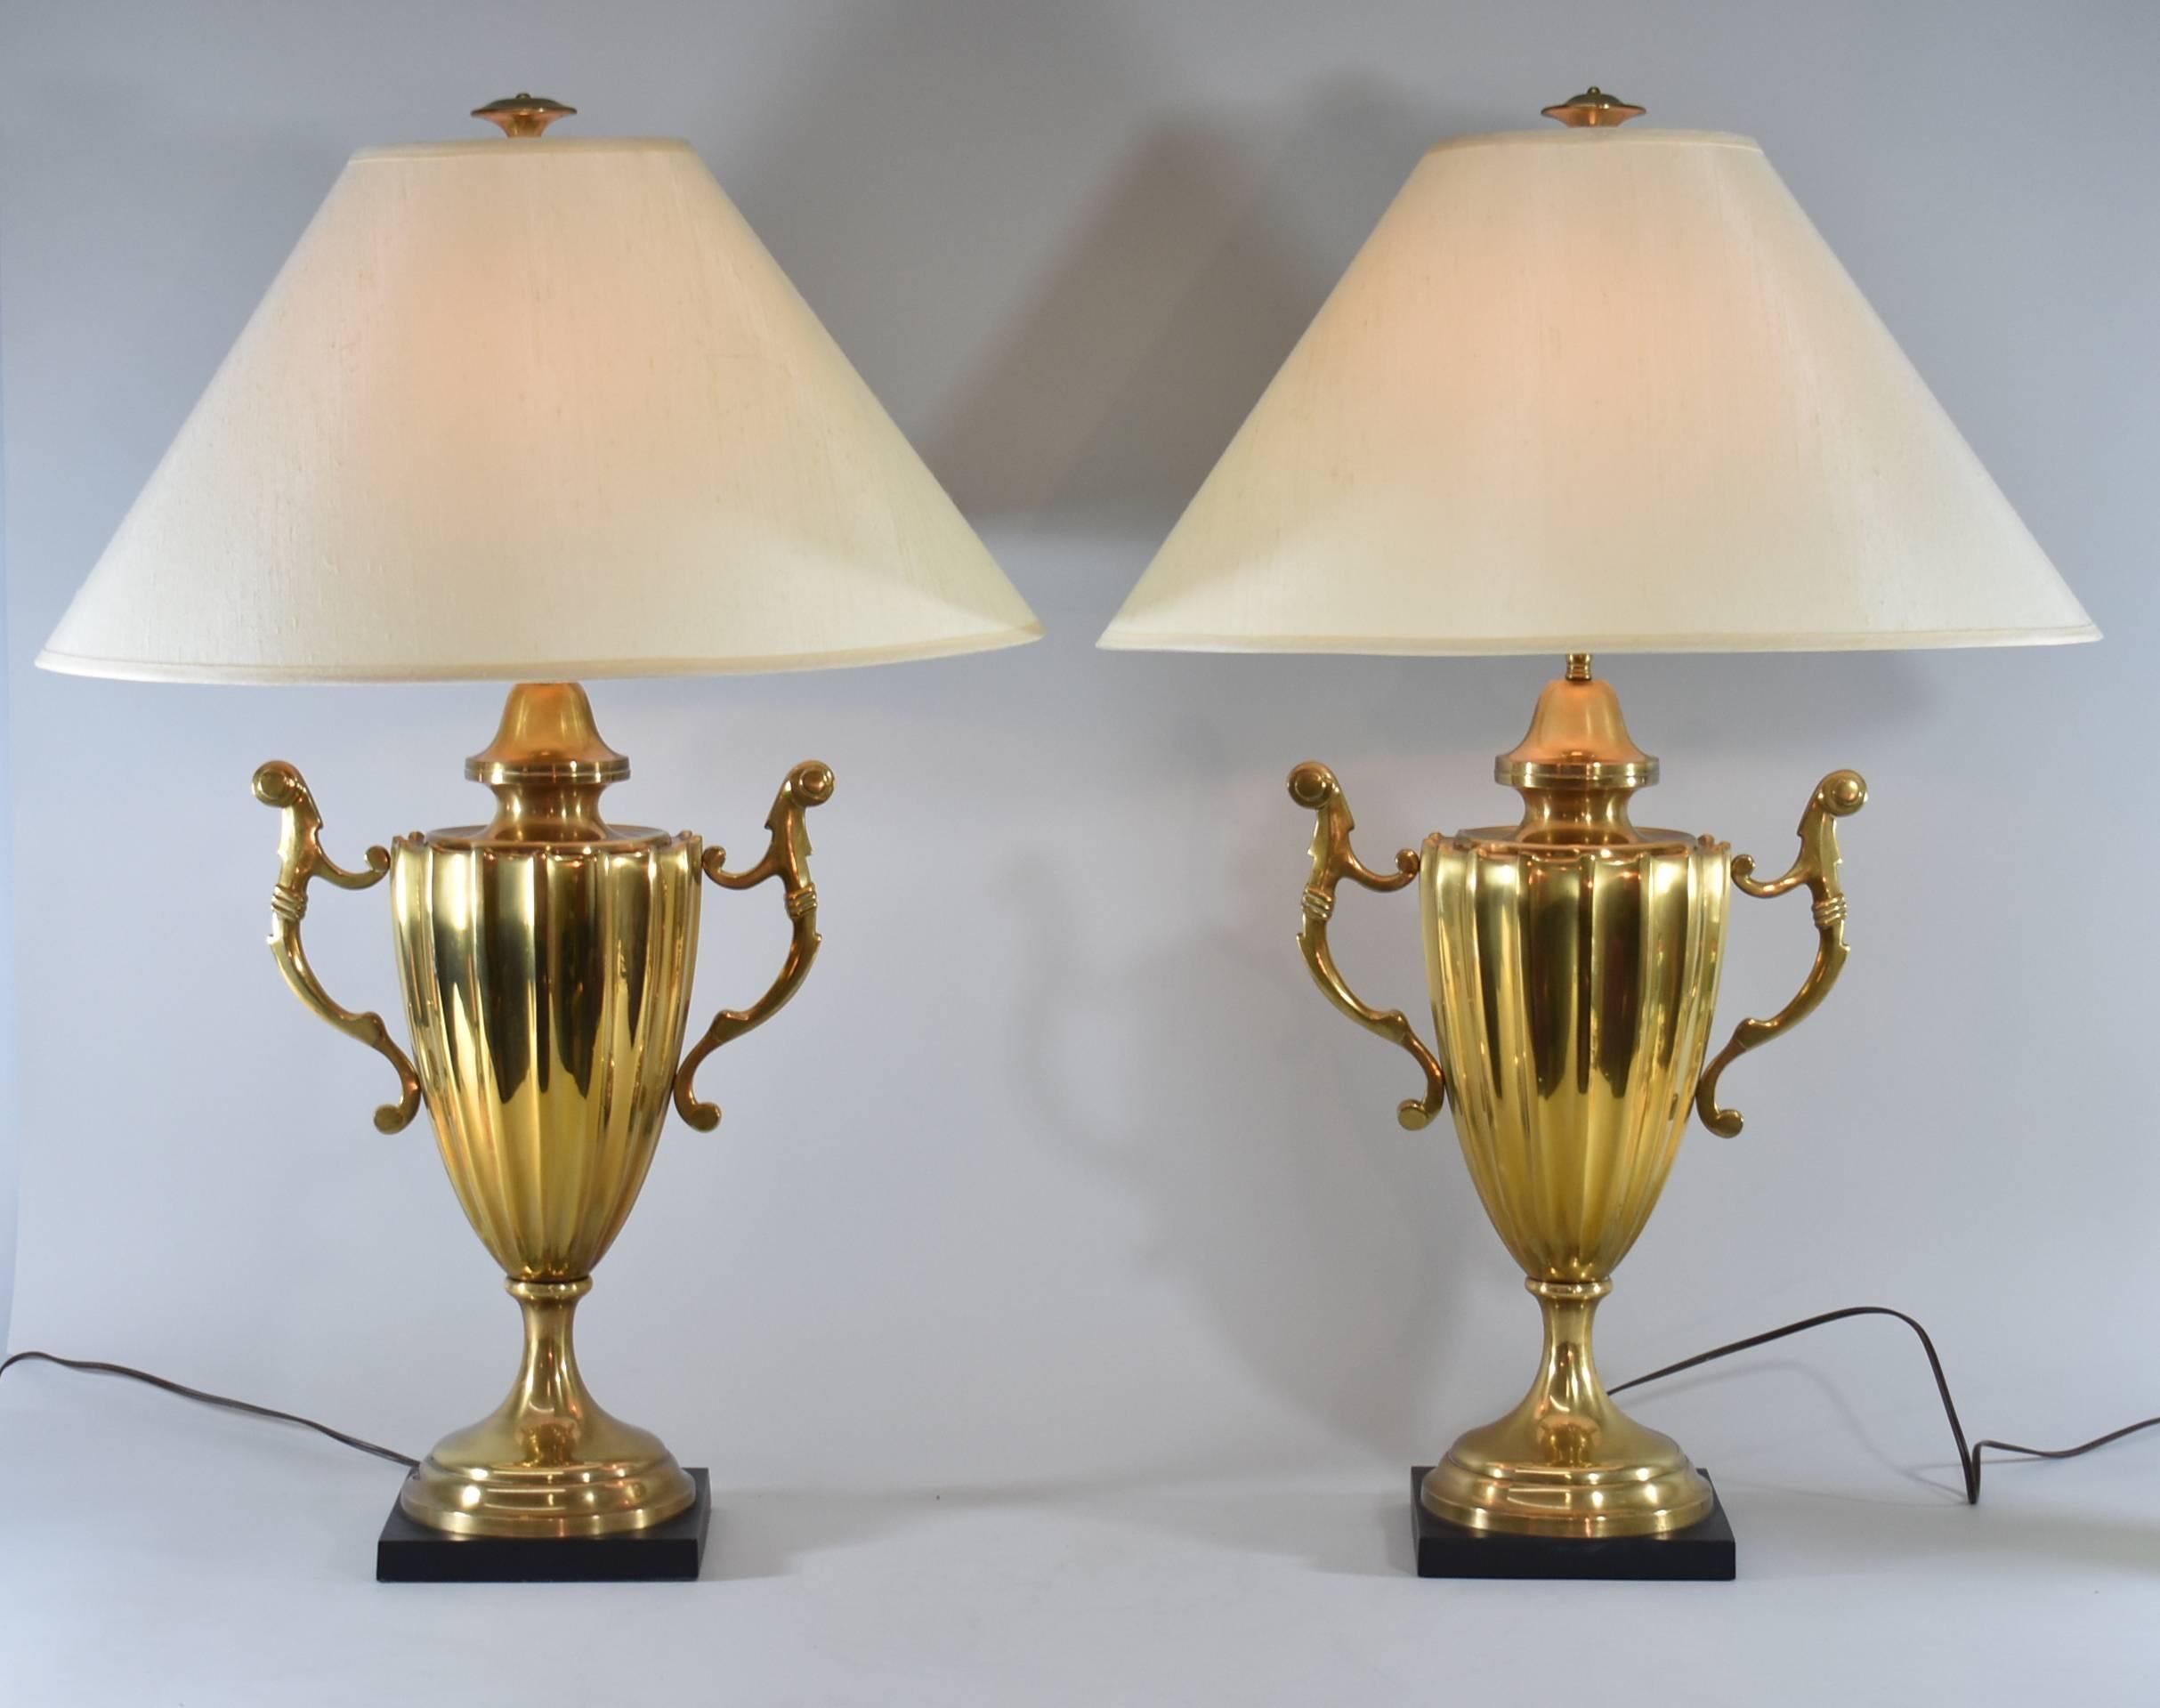 A beautiful pair of large-scale table lamps by Chapman, 1985. They feature a brass urn shaped body with handles and a black metal base. Perfect for any room in your home.